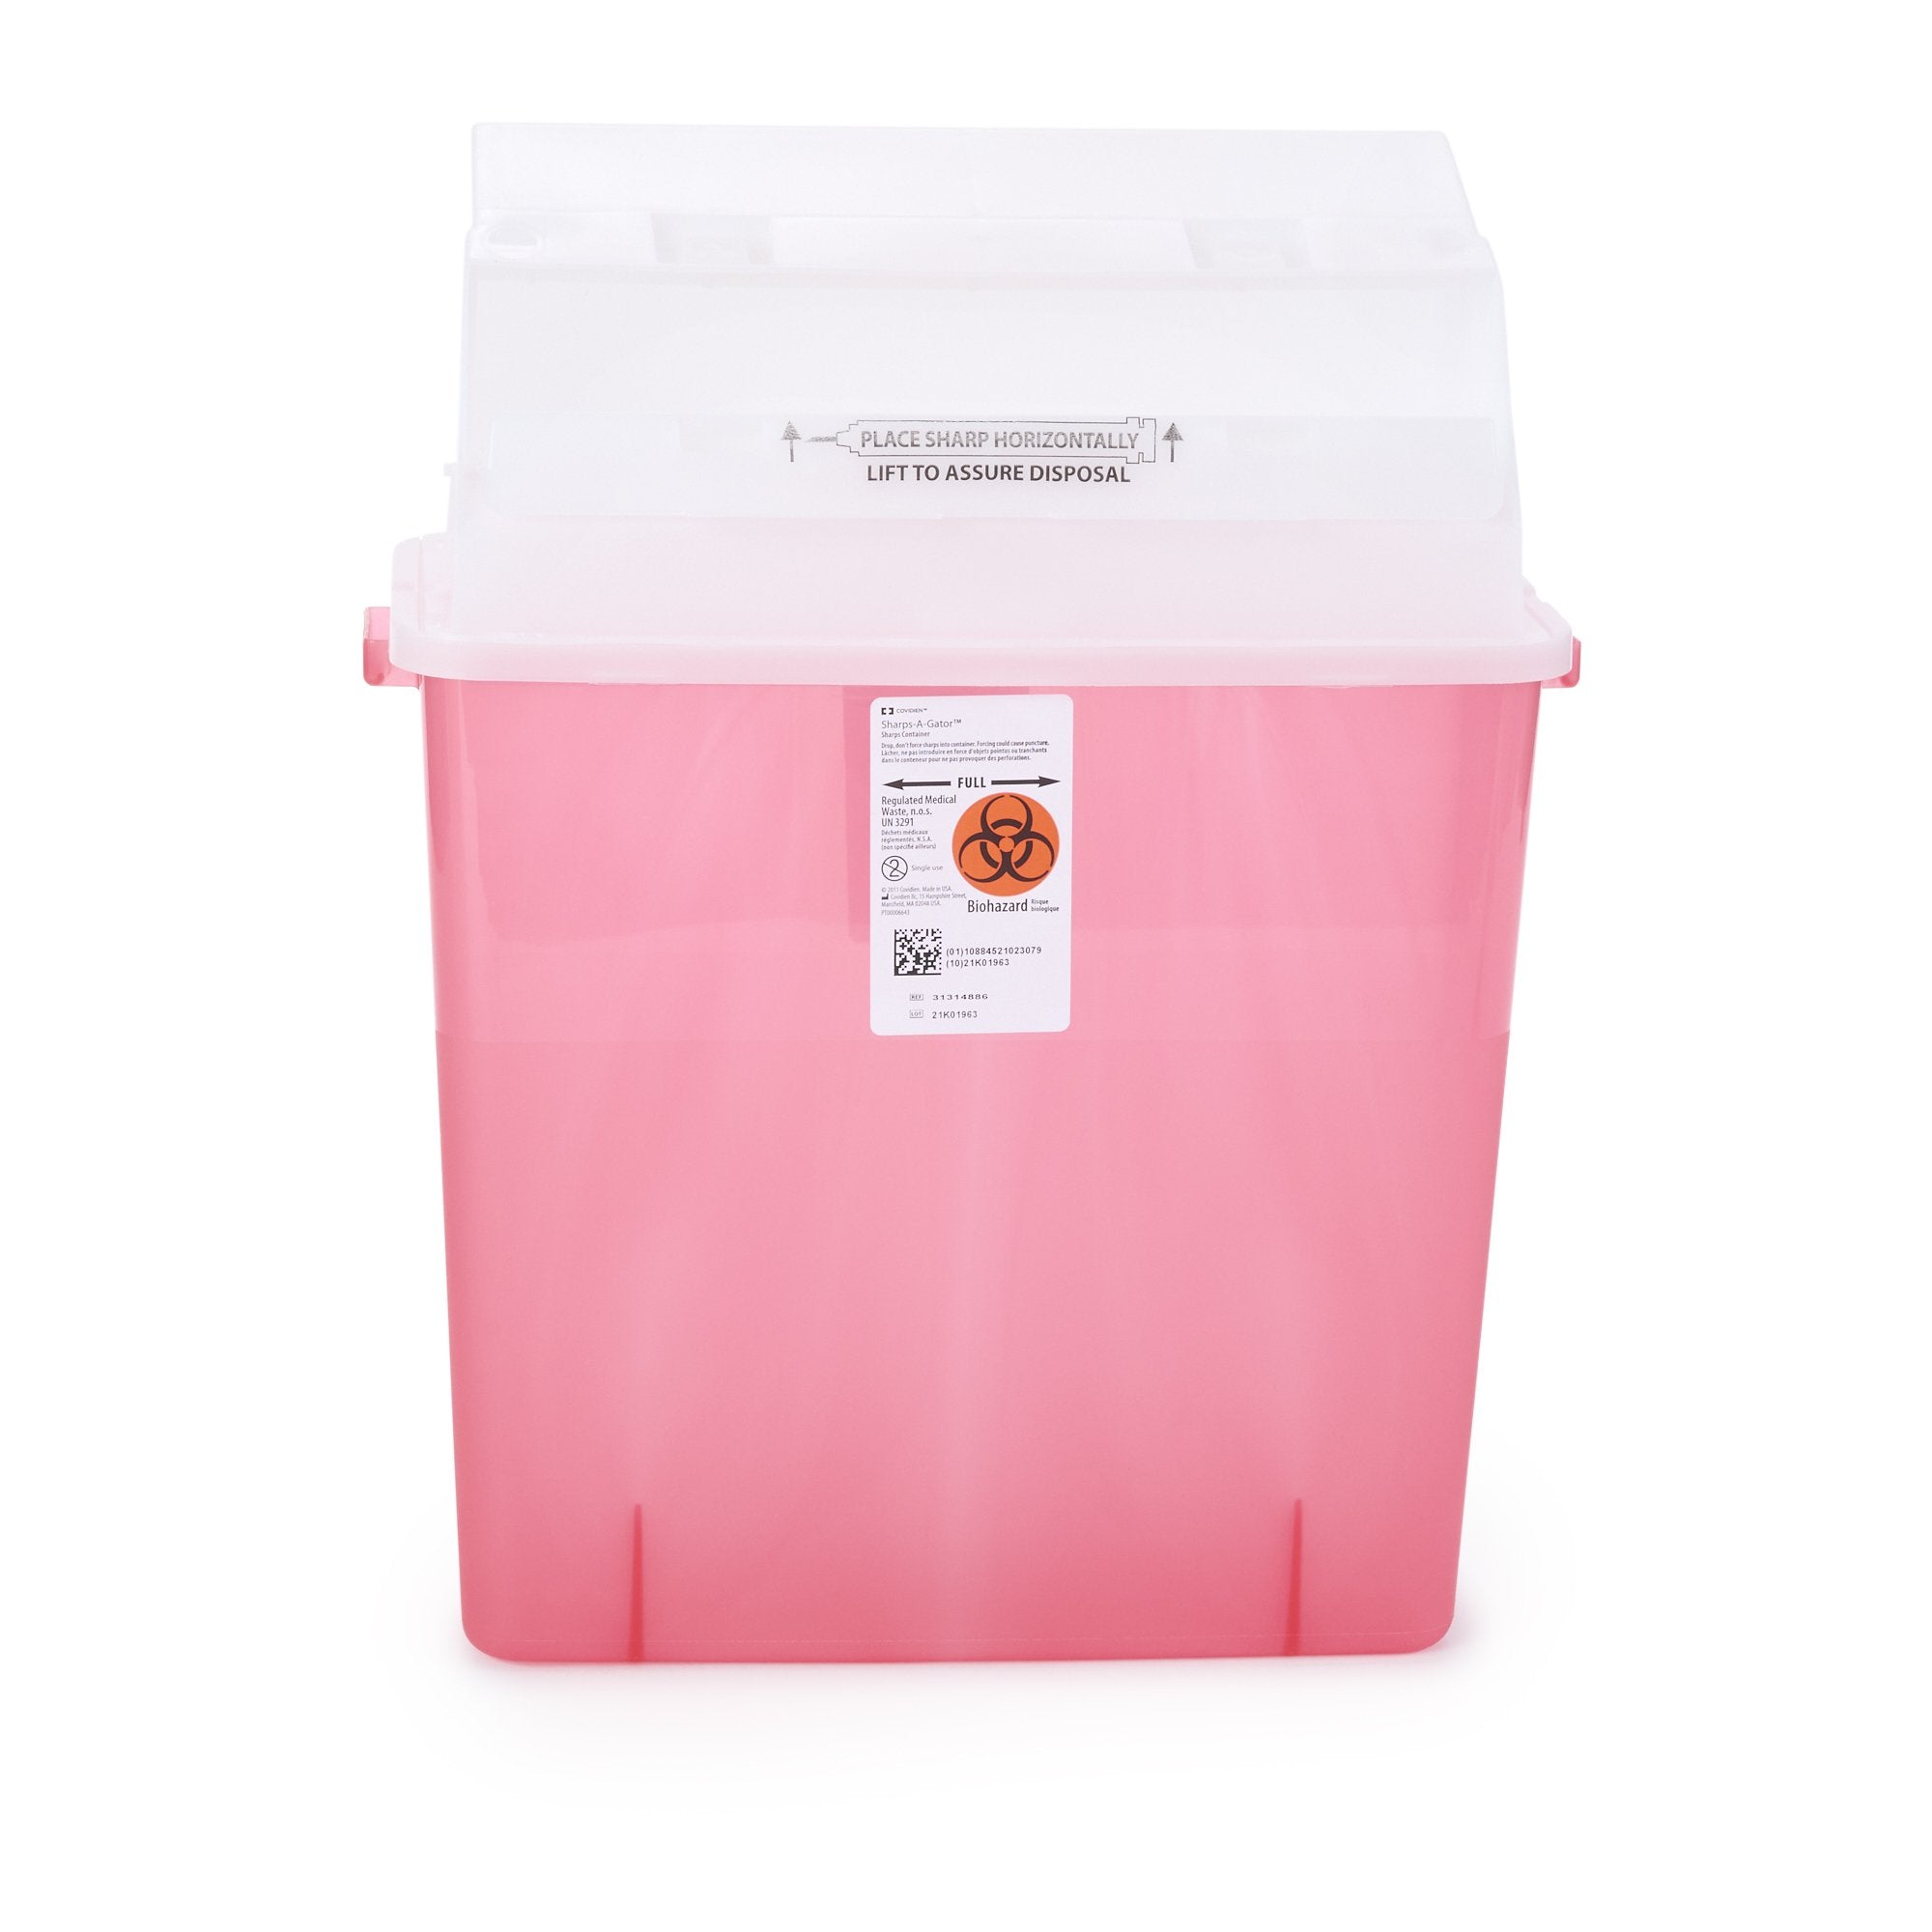 Sharps Container GatorGuard In-Room Translucent Red Base 20-1/2 H X 14 W X 6 D Inch Horizontal Entry 3 Gallon